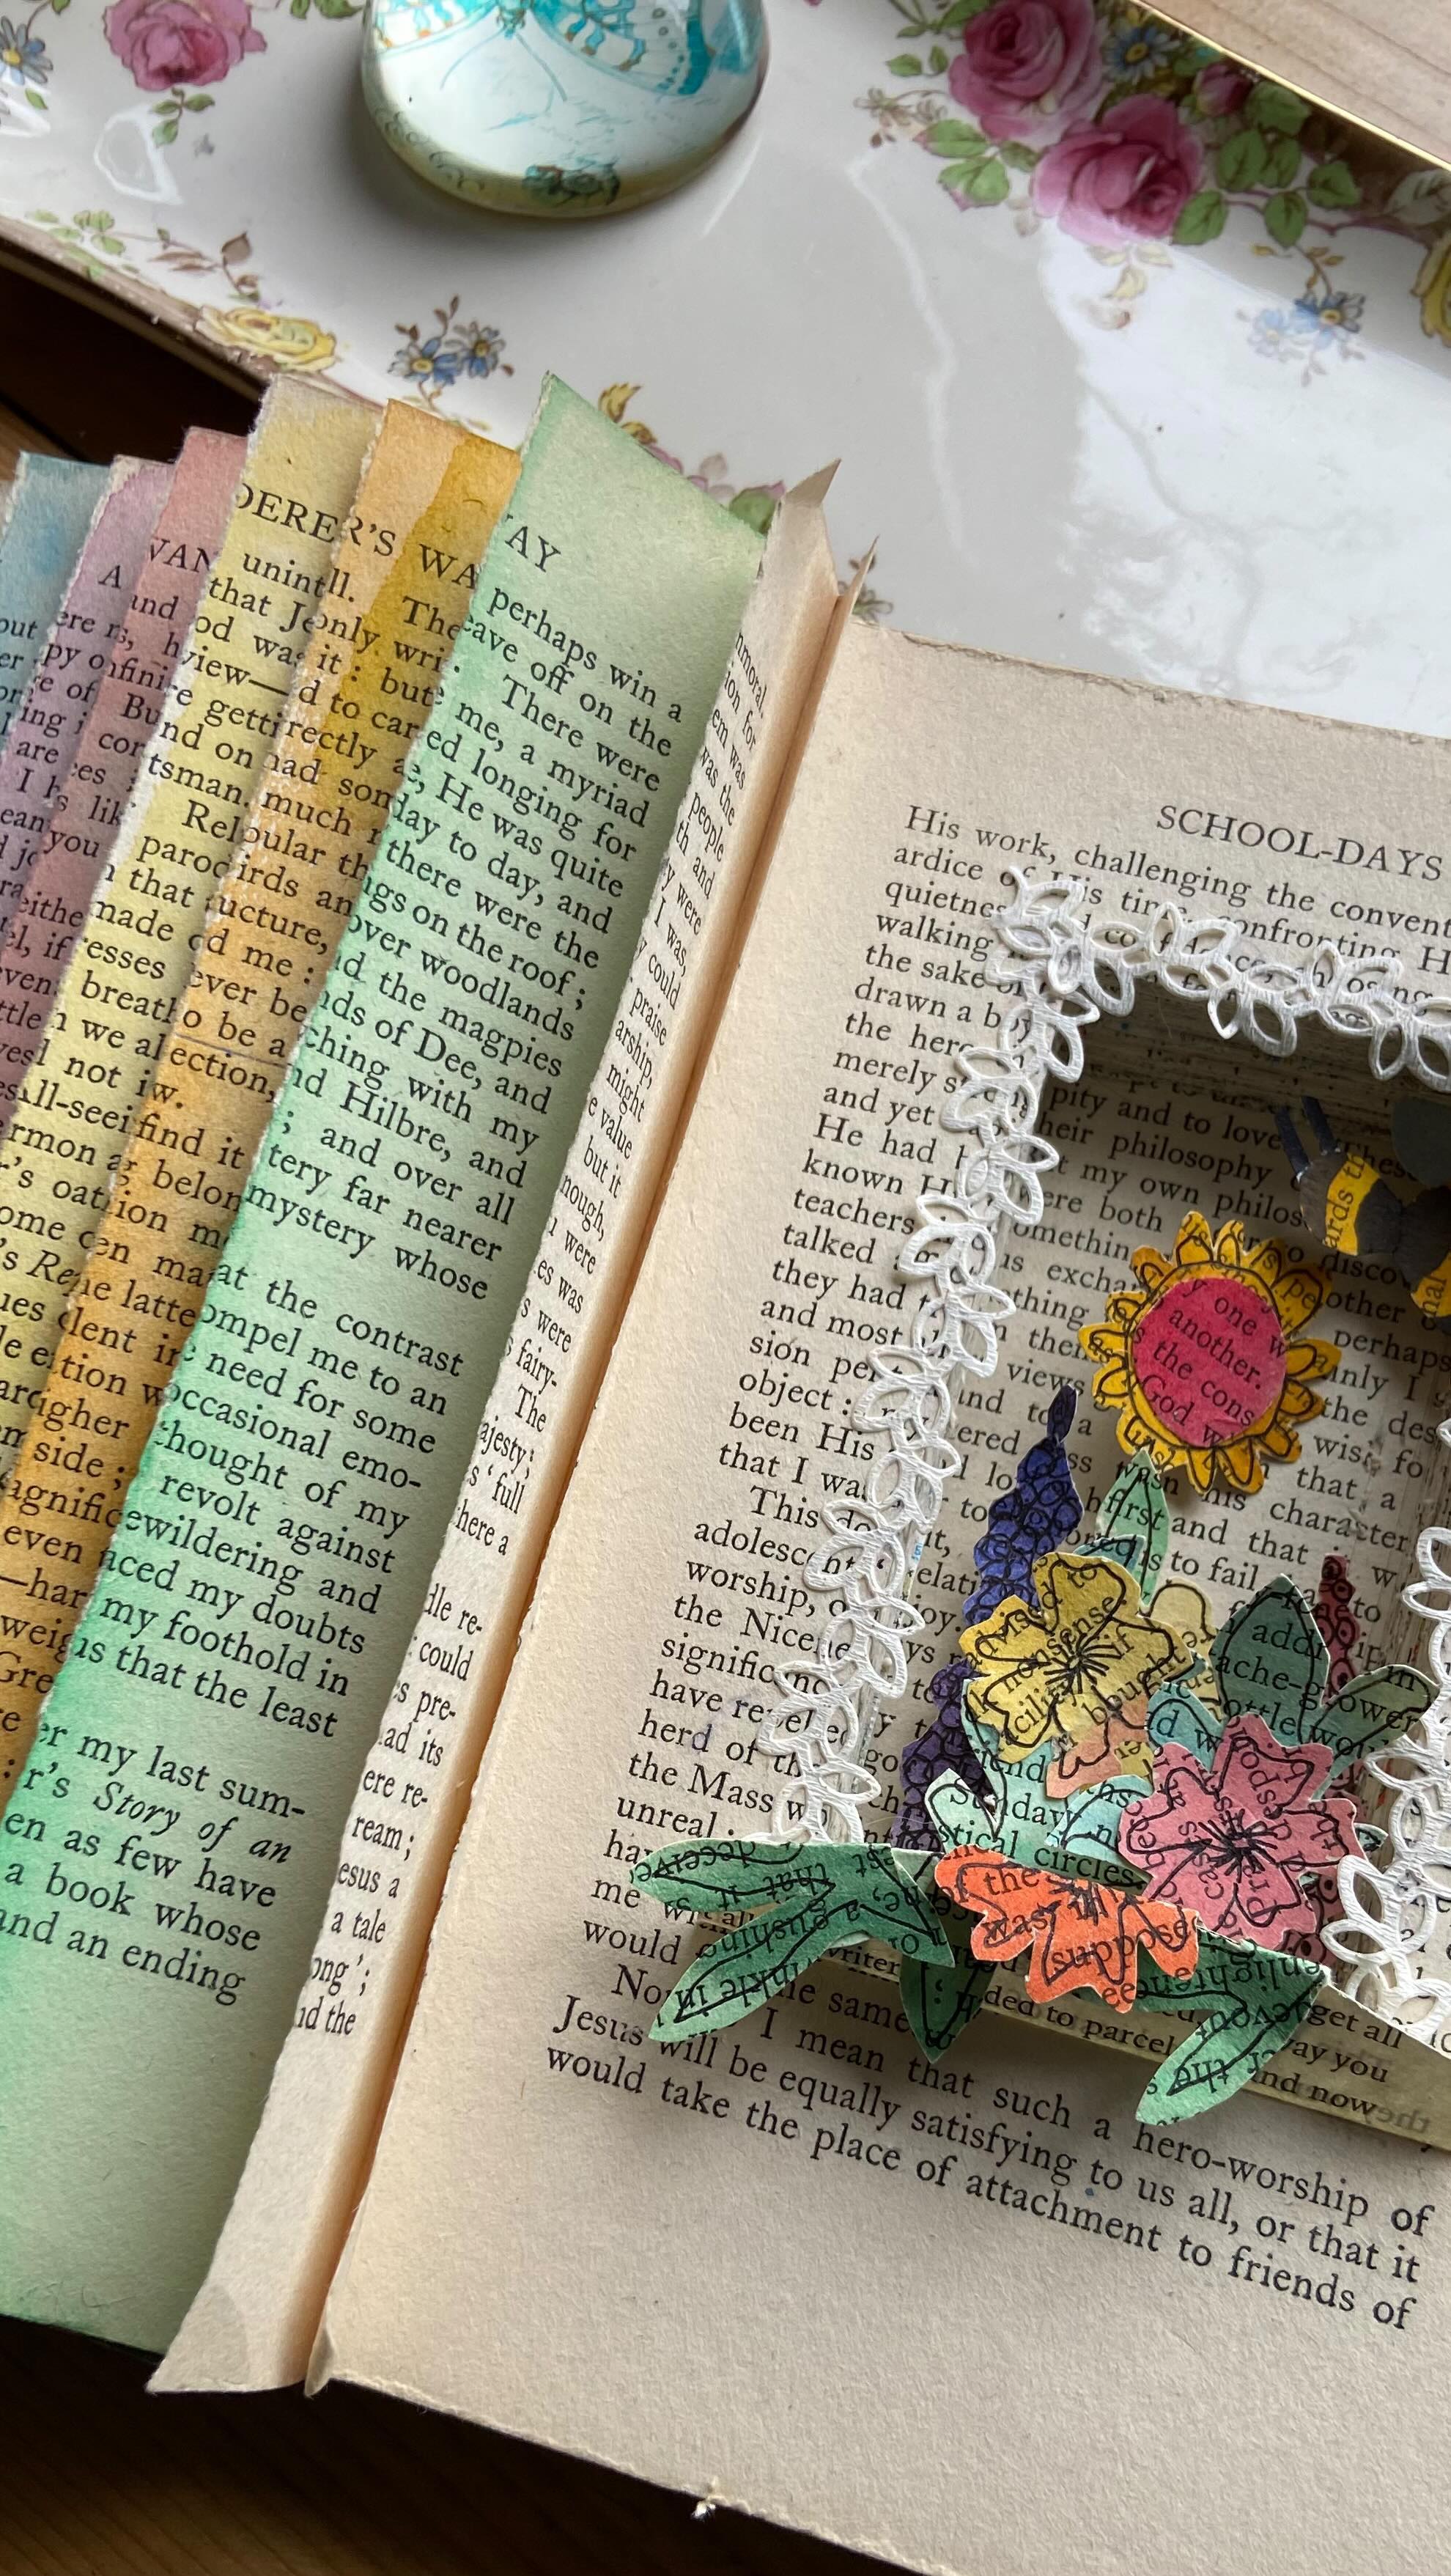 Fantastic day workshop with @just.so.sara on #internationalwomensday making exquisite little secret book sculptures … definitely one to do again . Check out link for more workshops! @visitsouthdevon @visitplymouth @cultureisalive 
-
-
-
-
-
#workshops #studiolife #bookart #bookstagram #booksculpture #reuse #reclaim #upcycled #metime #soulfood #timeout